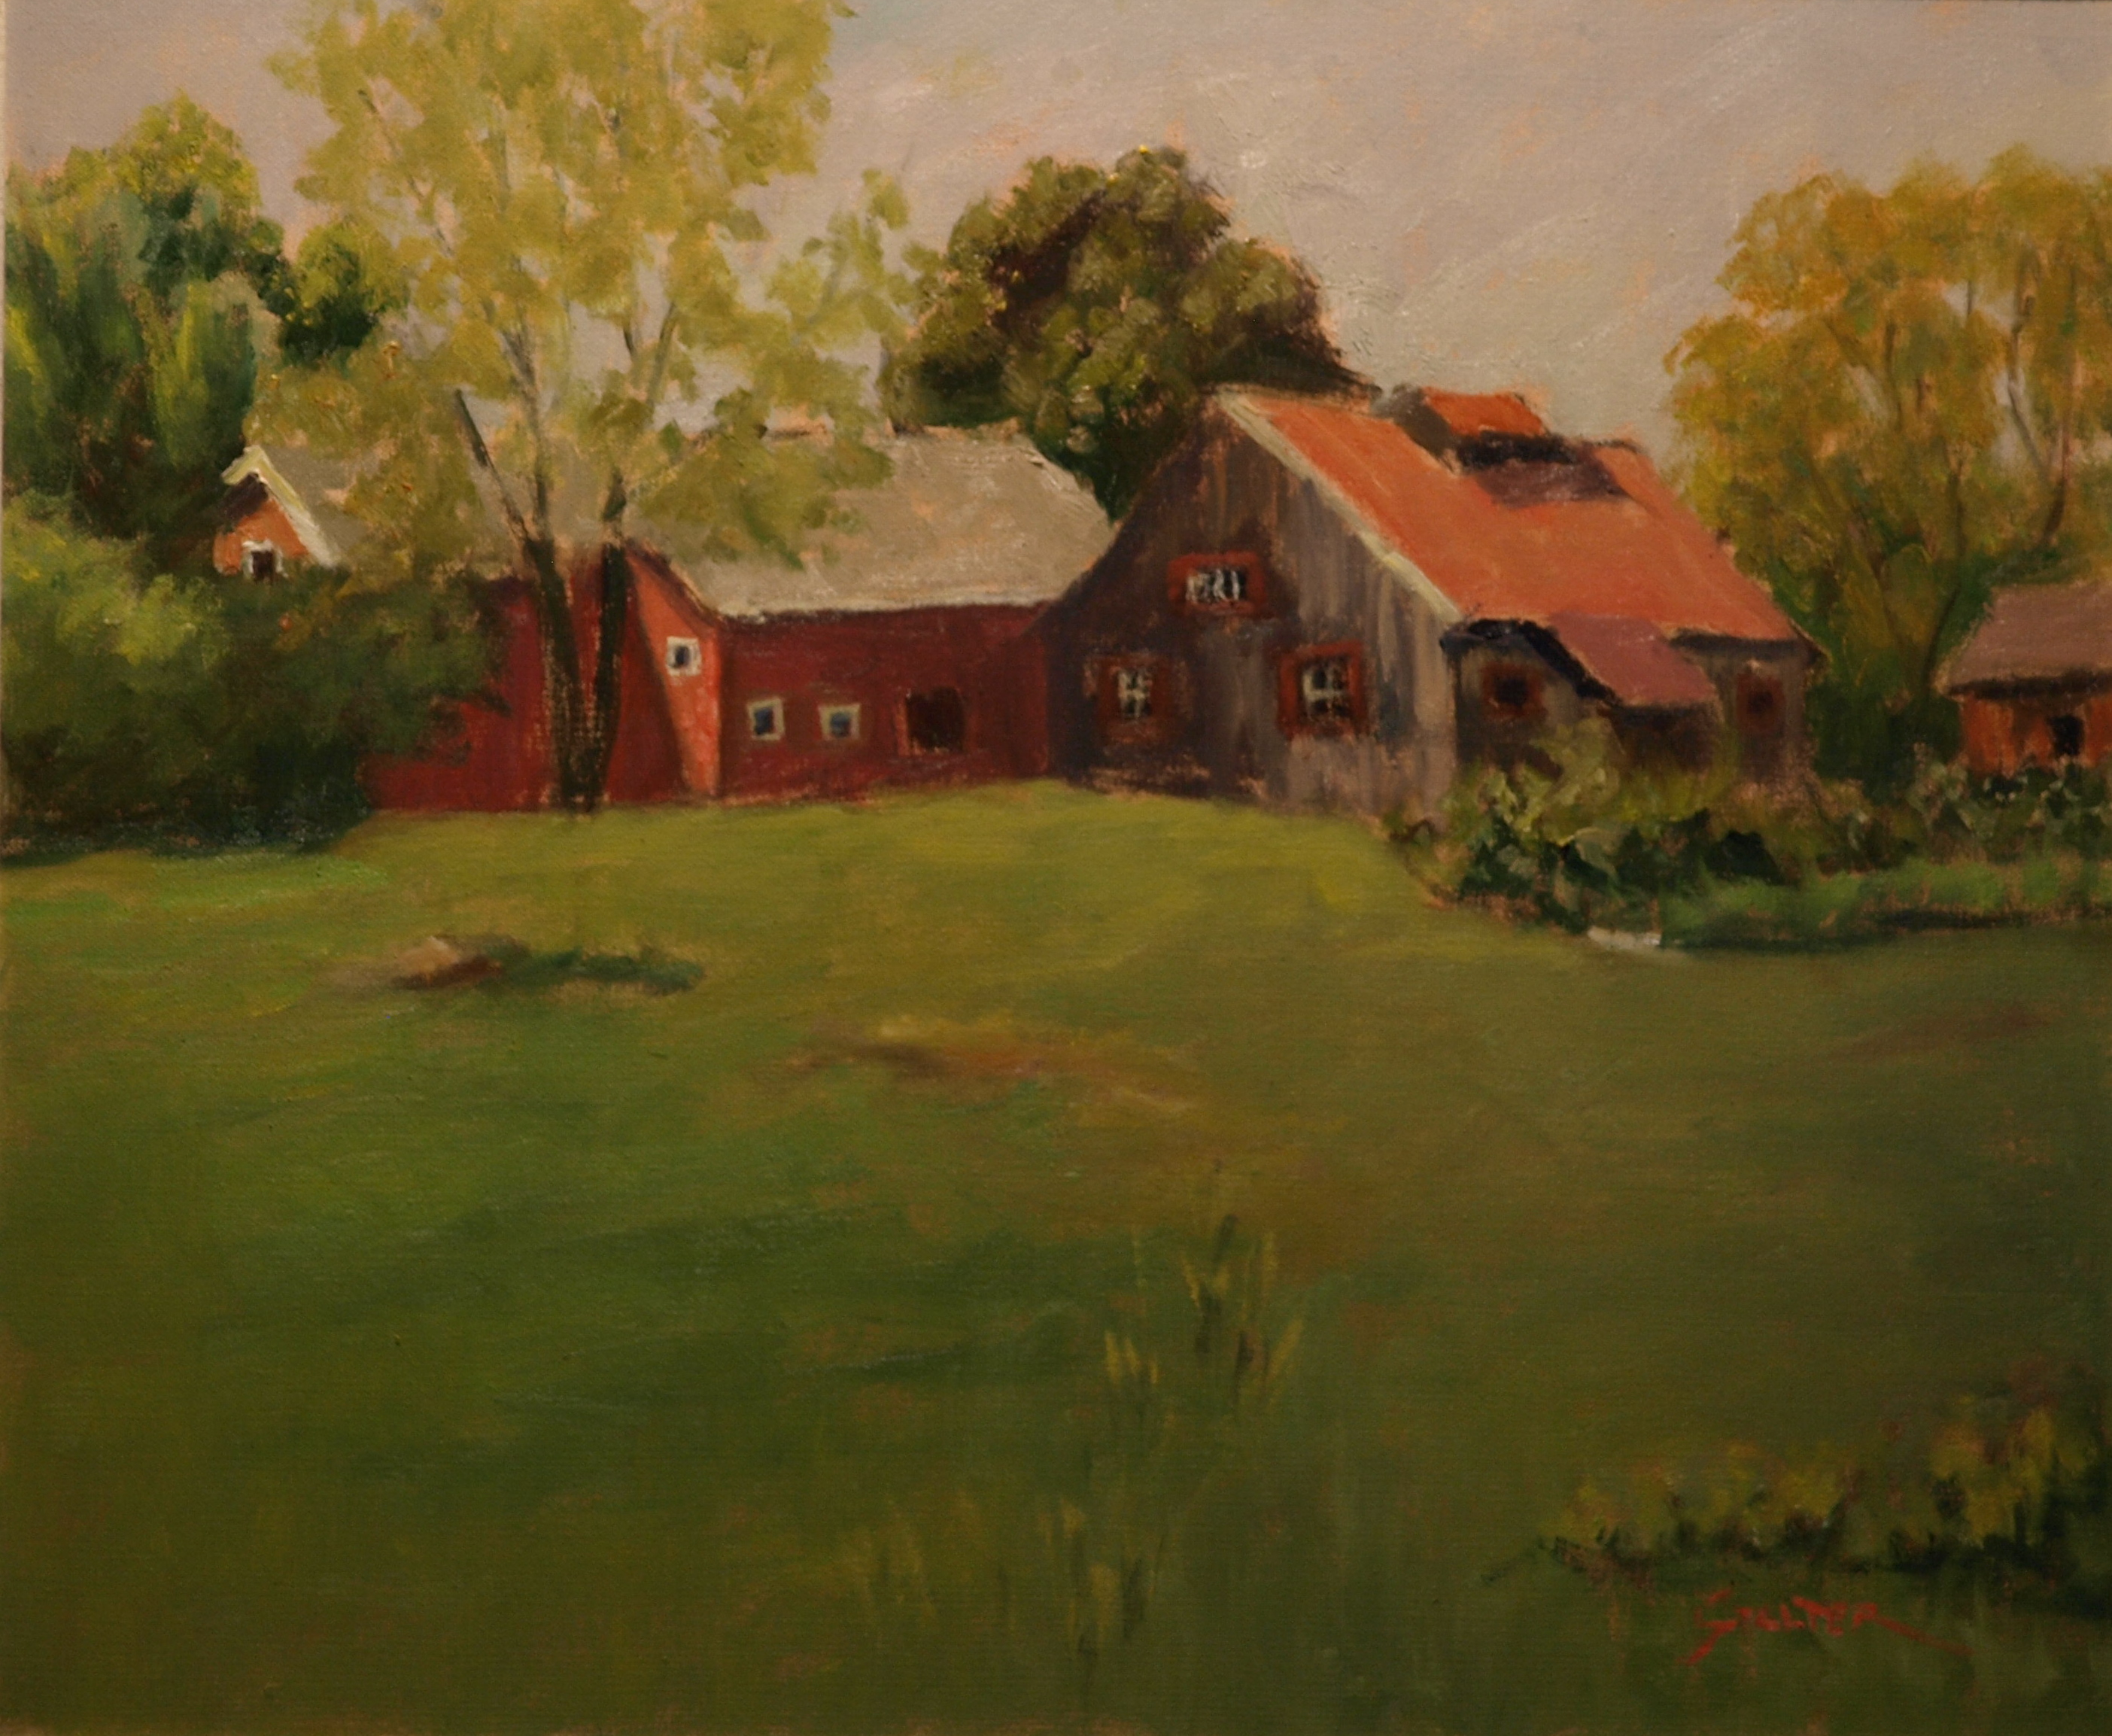 Sullivan Farms, Oil on Canvas, 20 x 24 Inches, by Richard Stalter, $850